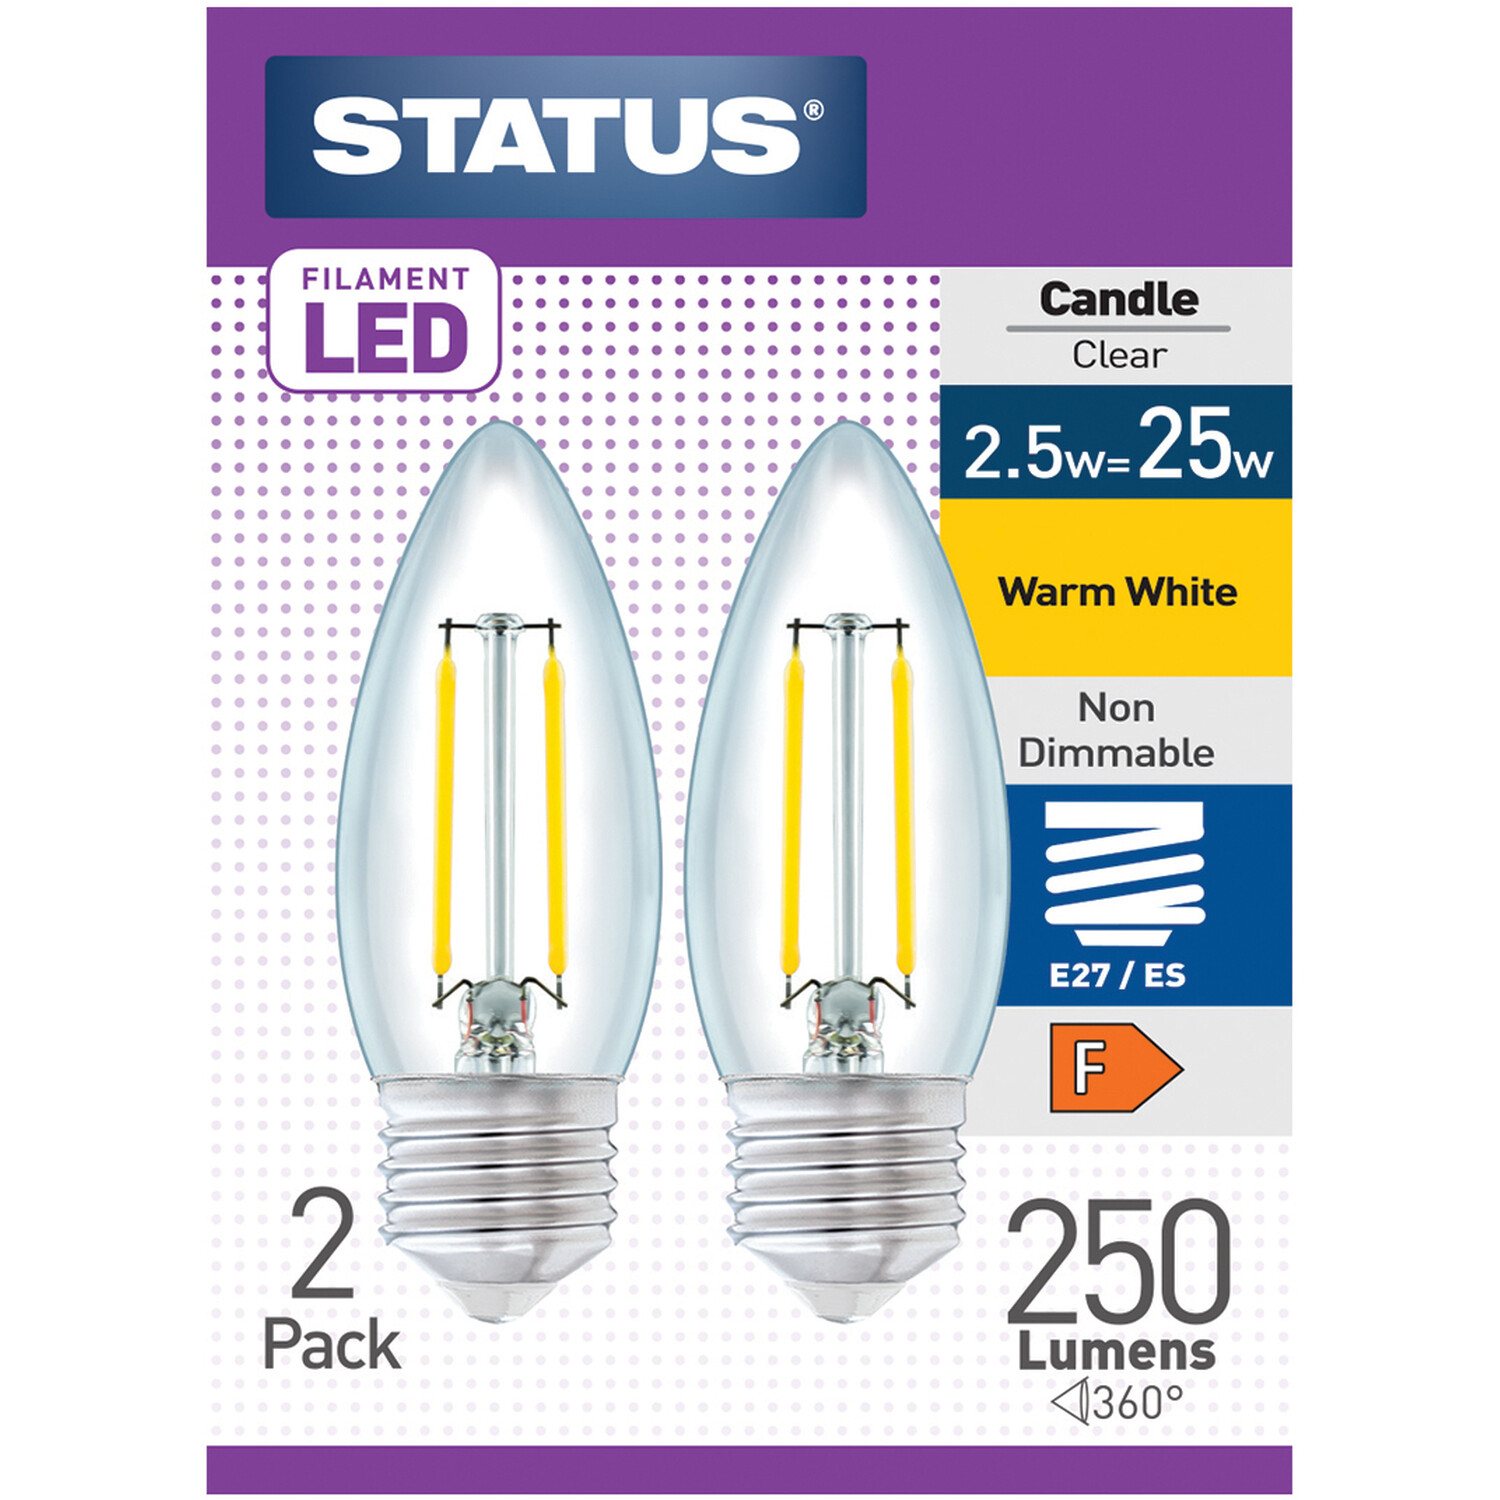 Status 2 Pack Edison Screw/ES Filament LED Clear Candle Bulbs Image 1